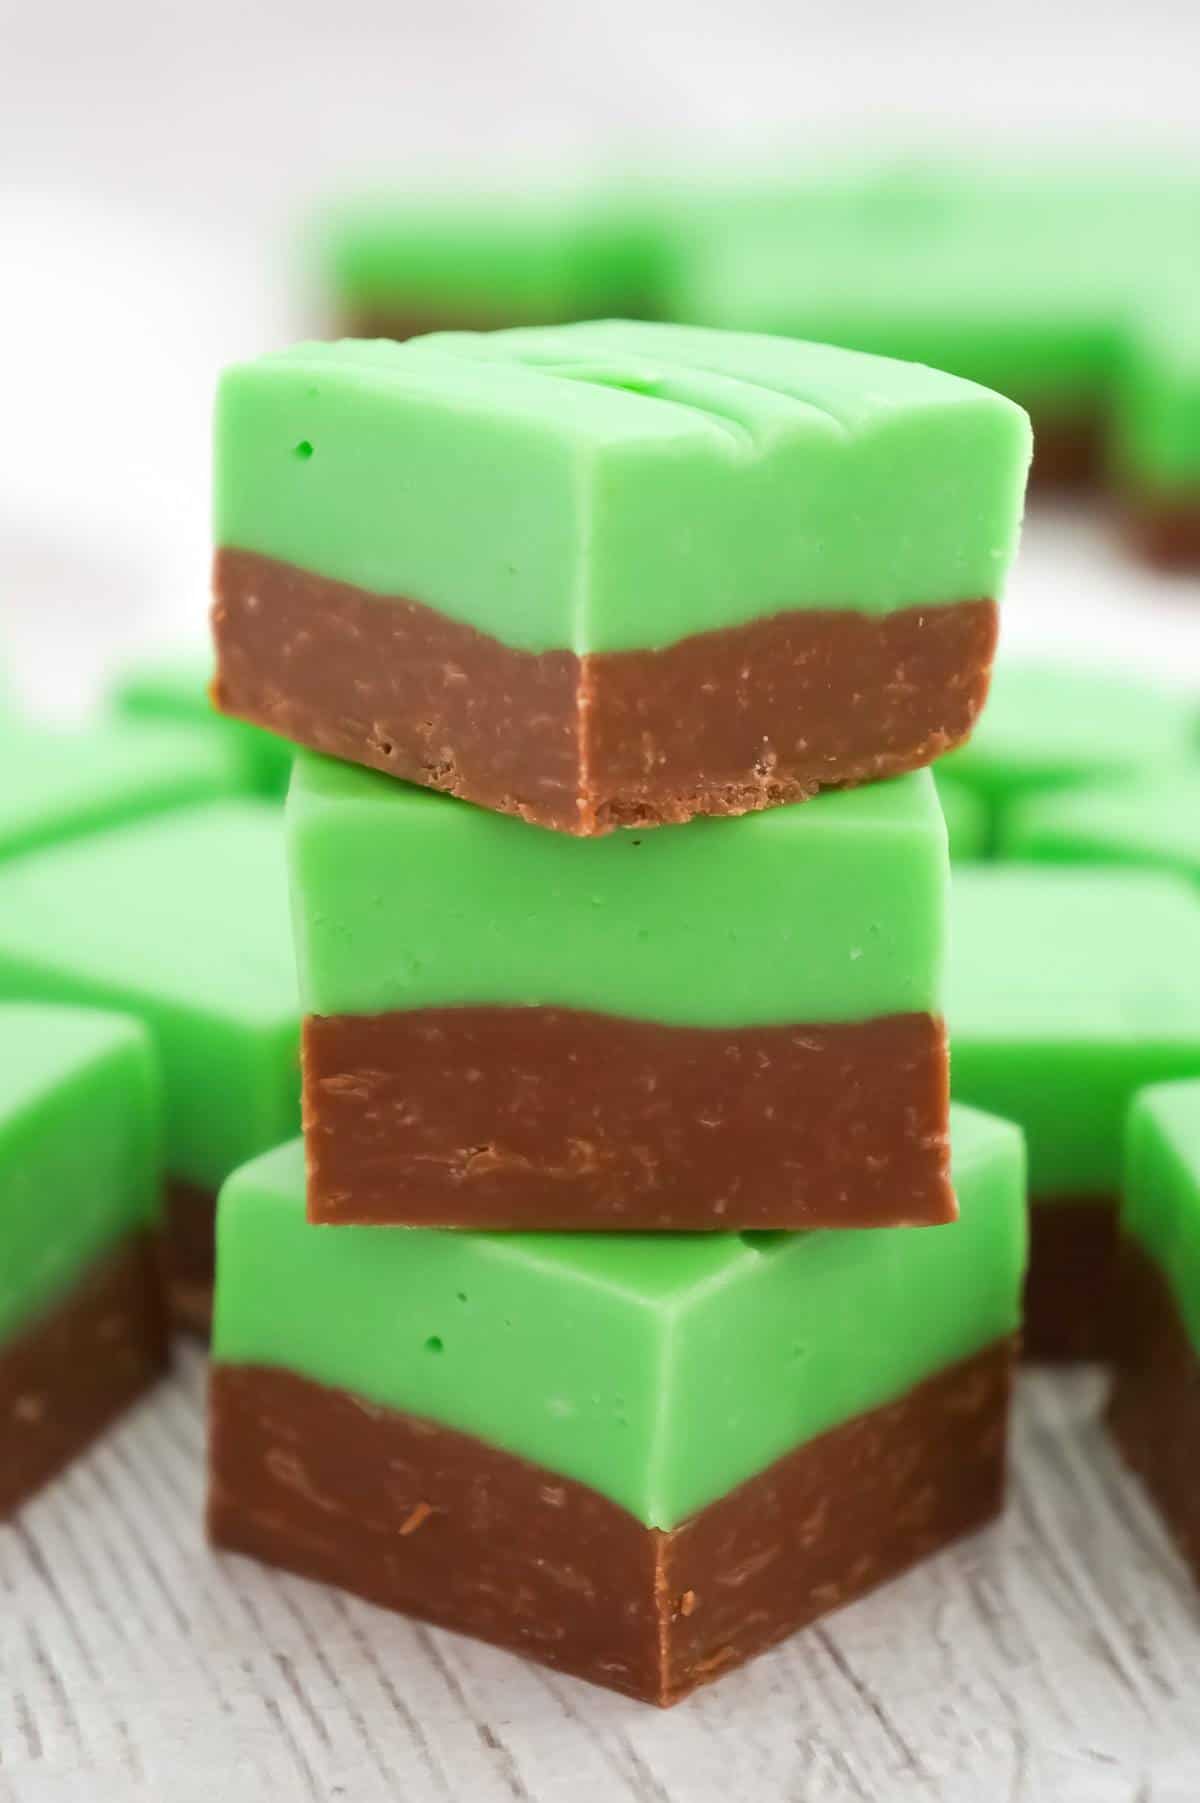 Mint Chocolate Fudge is an easy microwave fudge recipe using sweetened condensed milk, milk chocolate chips, white chocolate chips, green food colouring and mint extract.